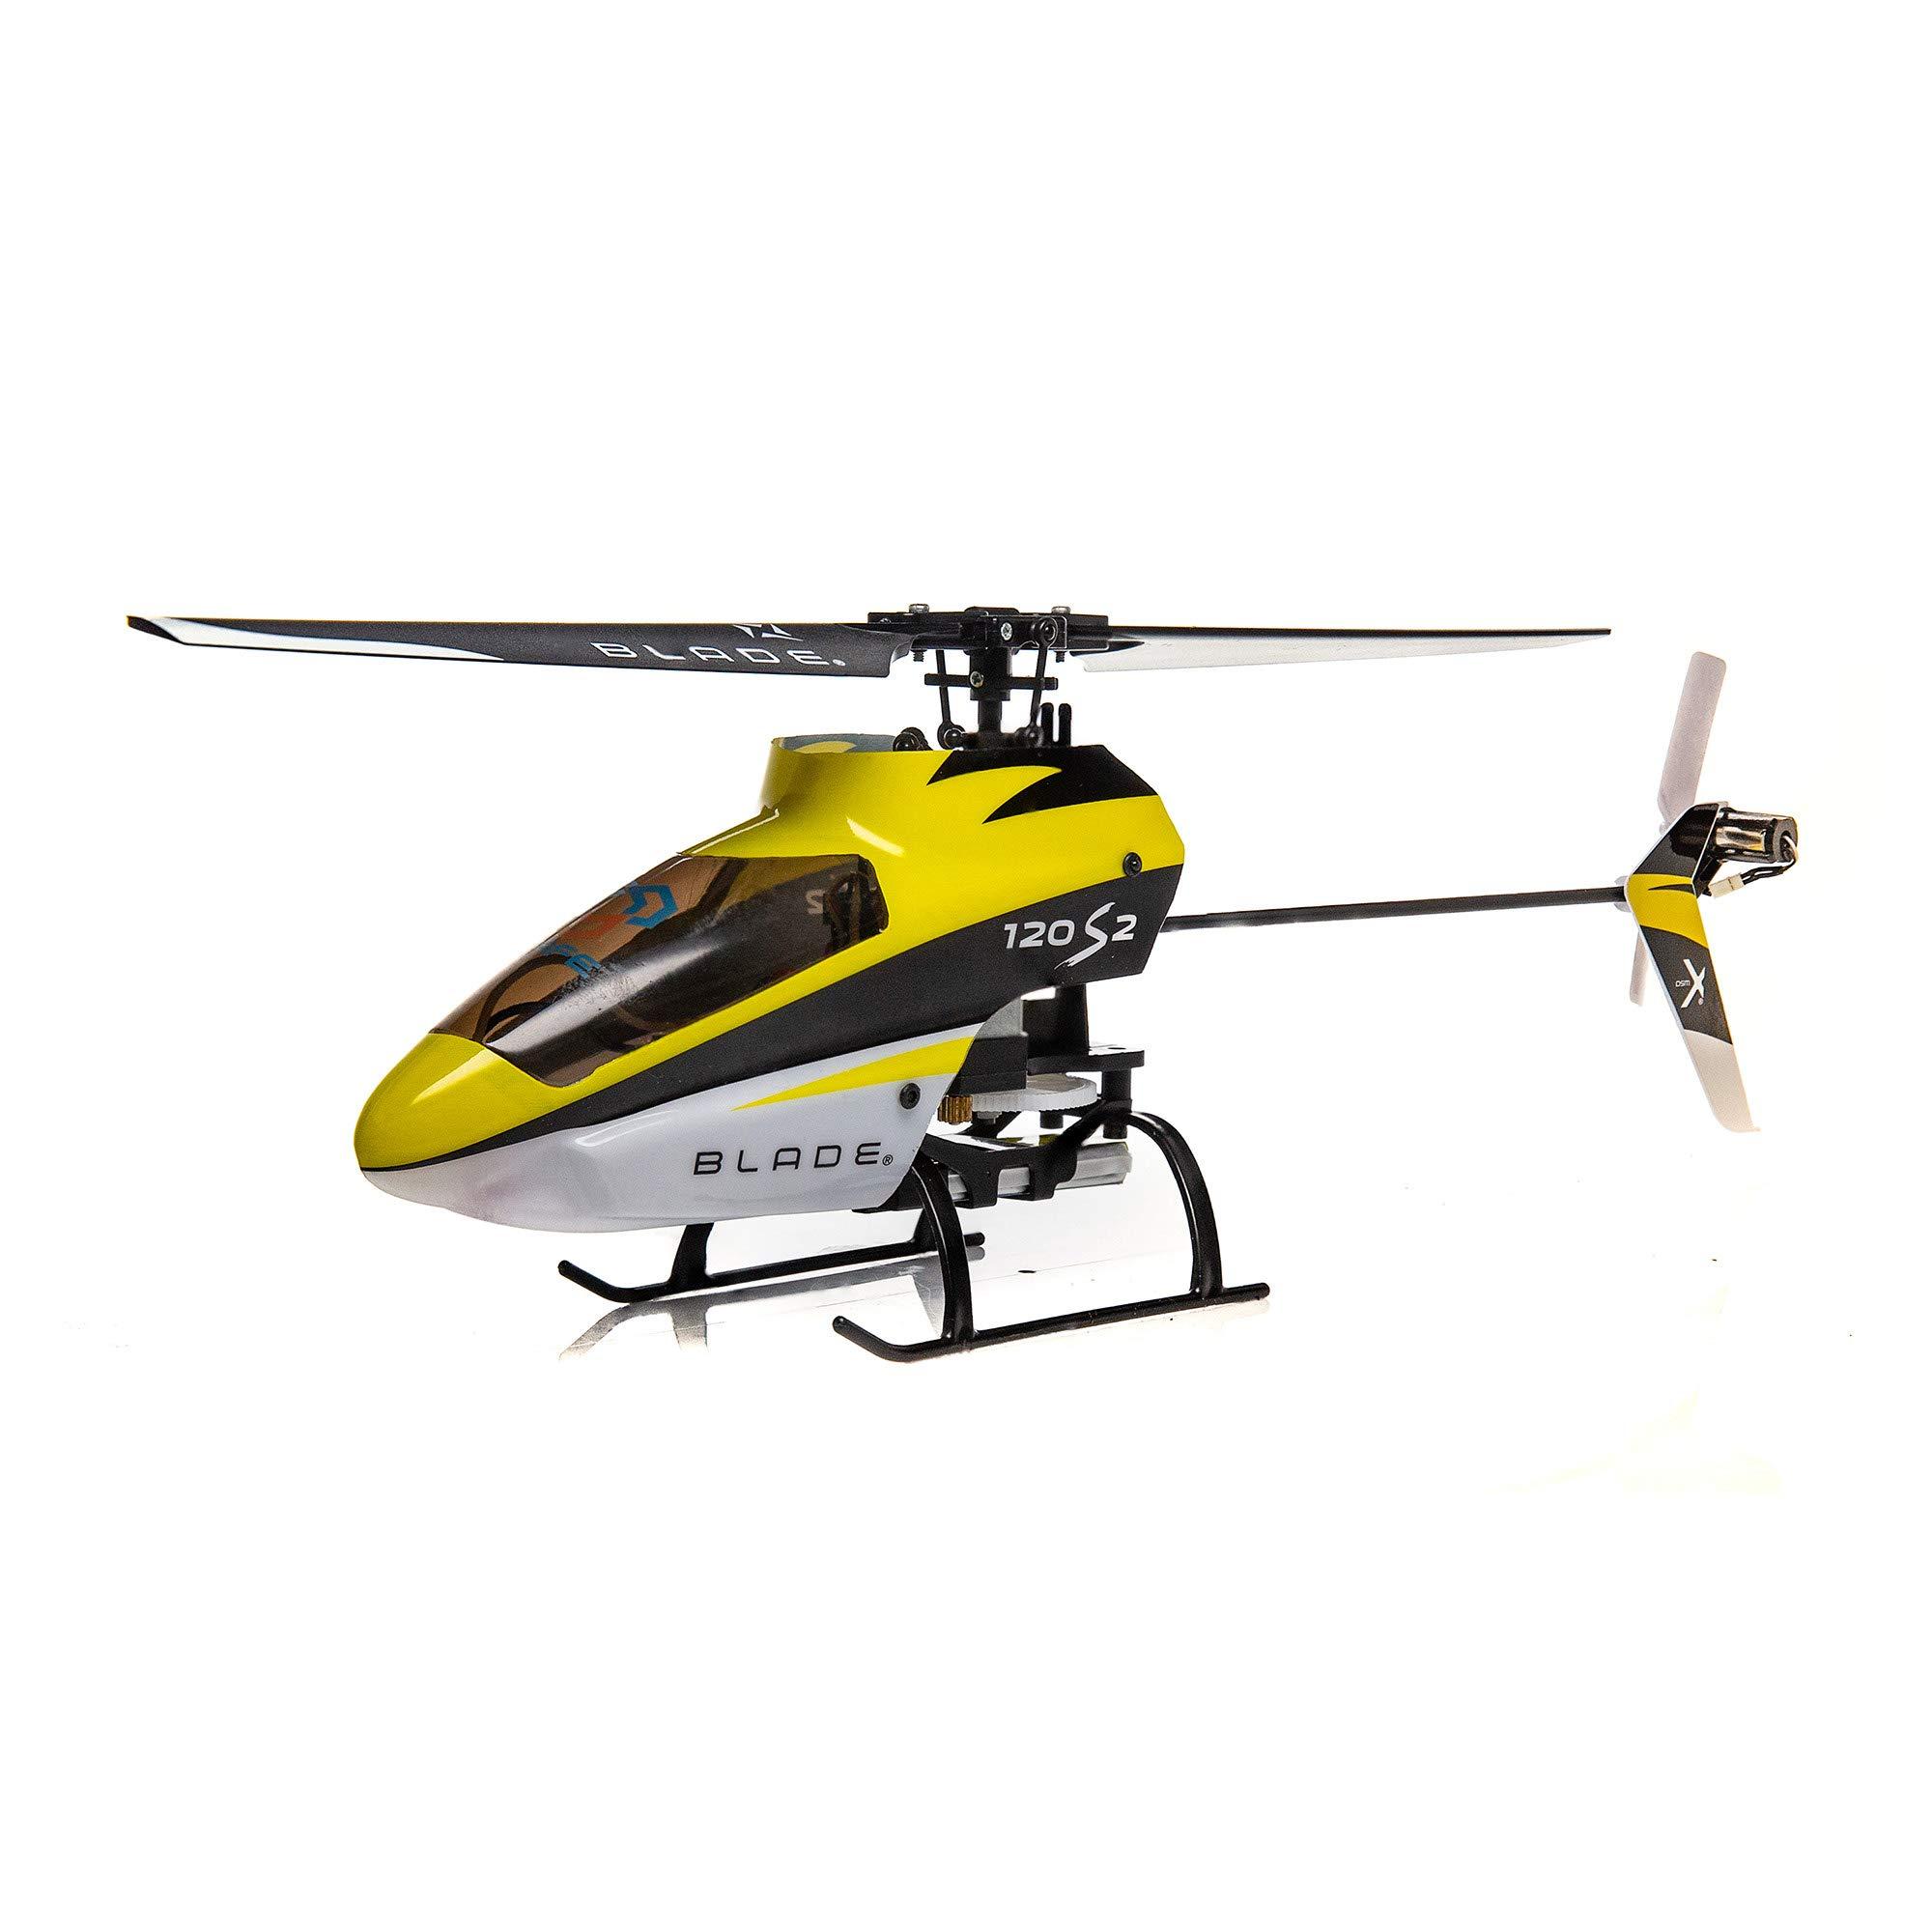 Ready To Fly Rc Helicopters: Components, Differences, and Variety of Ready to Fly RC Helicopters